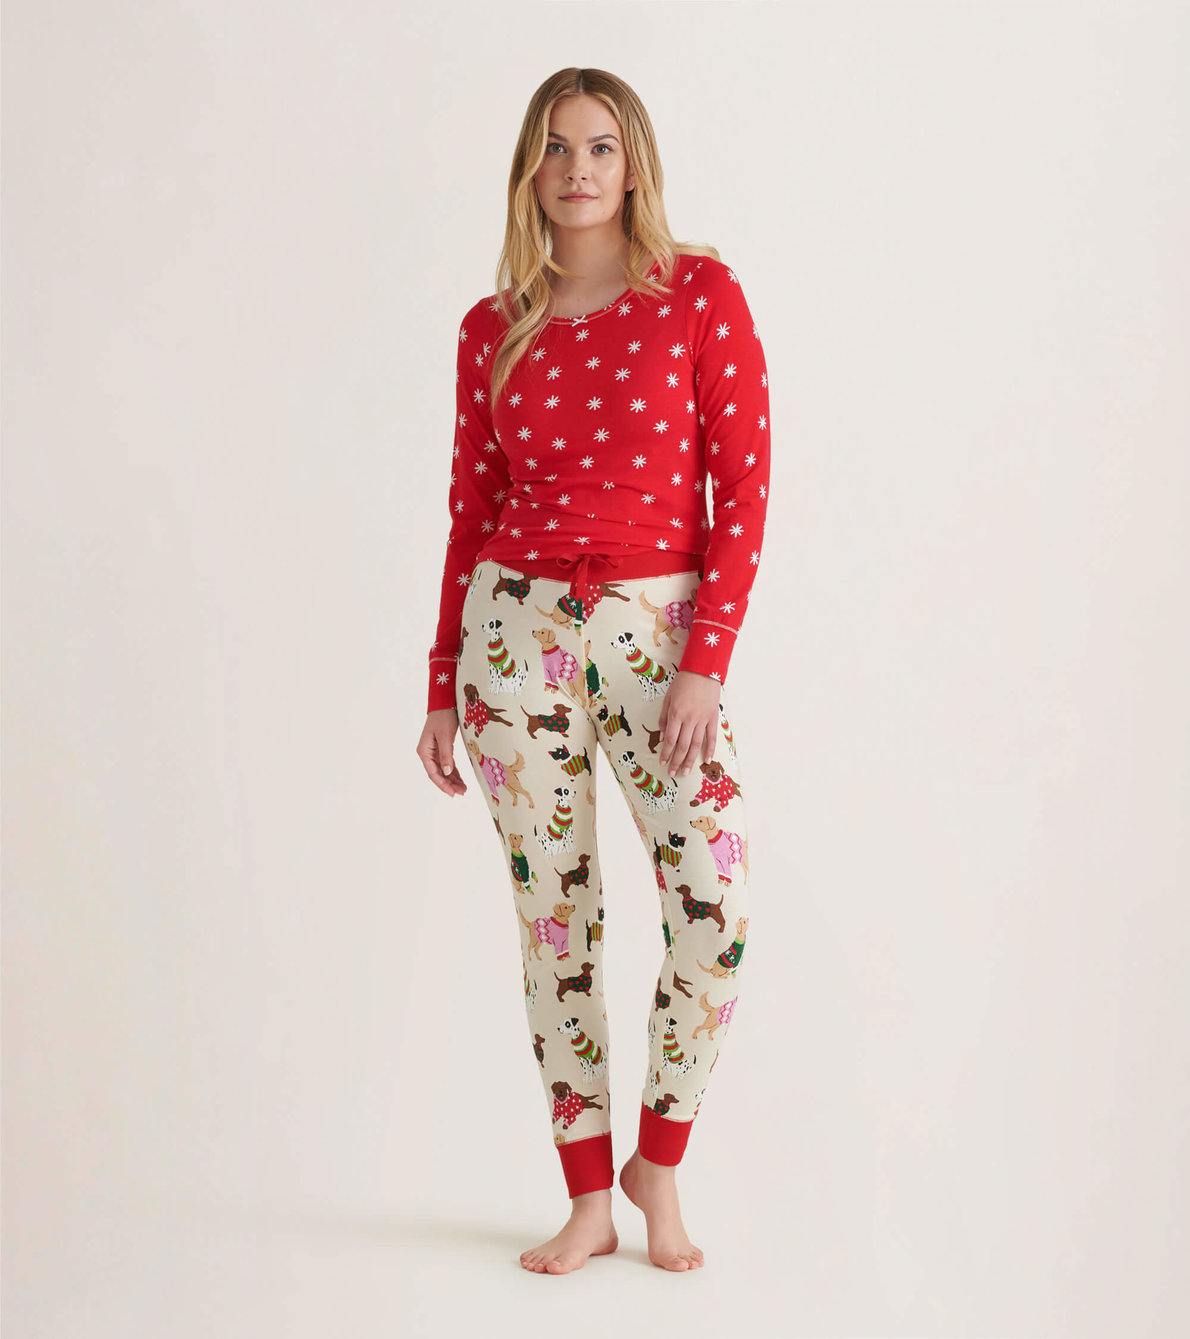 View larger image of Woofing Christmas Women's Tee and Leggings Pajama Separates